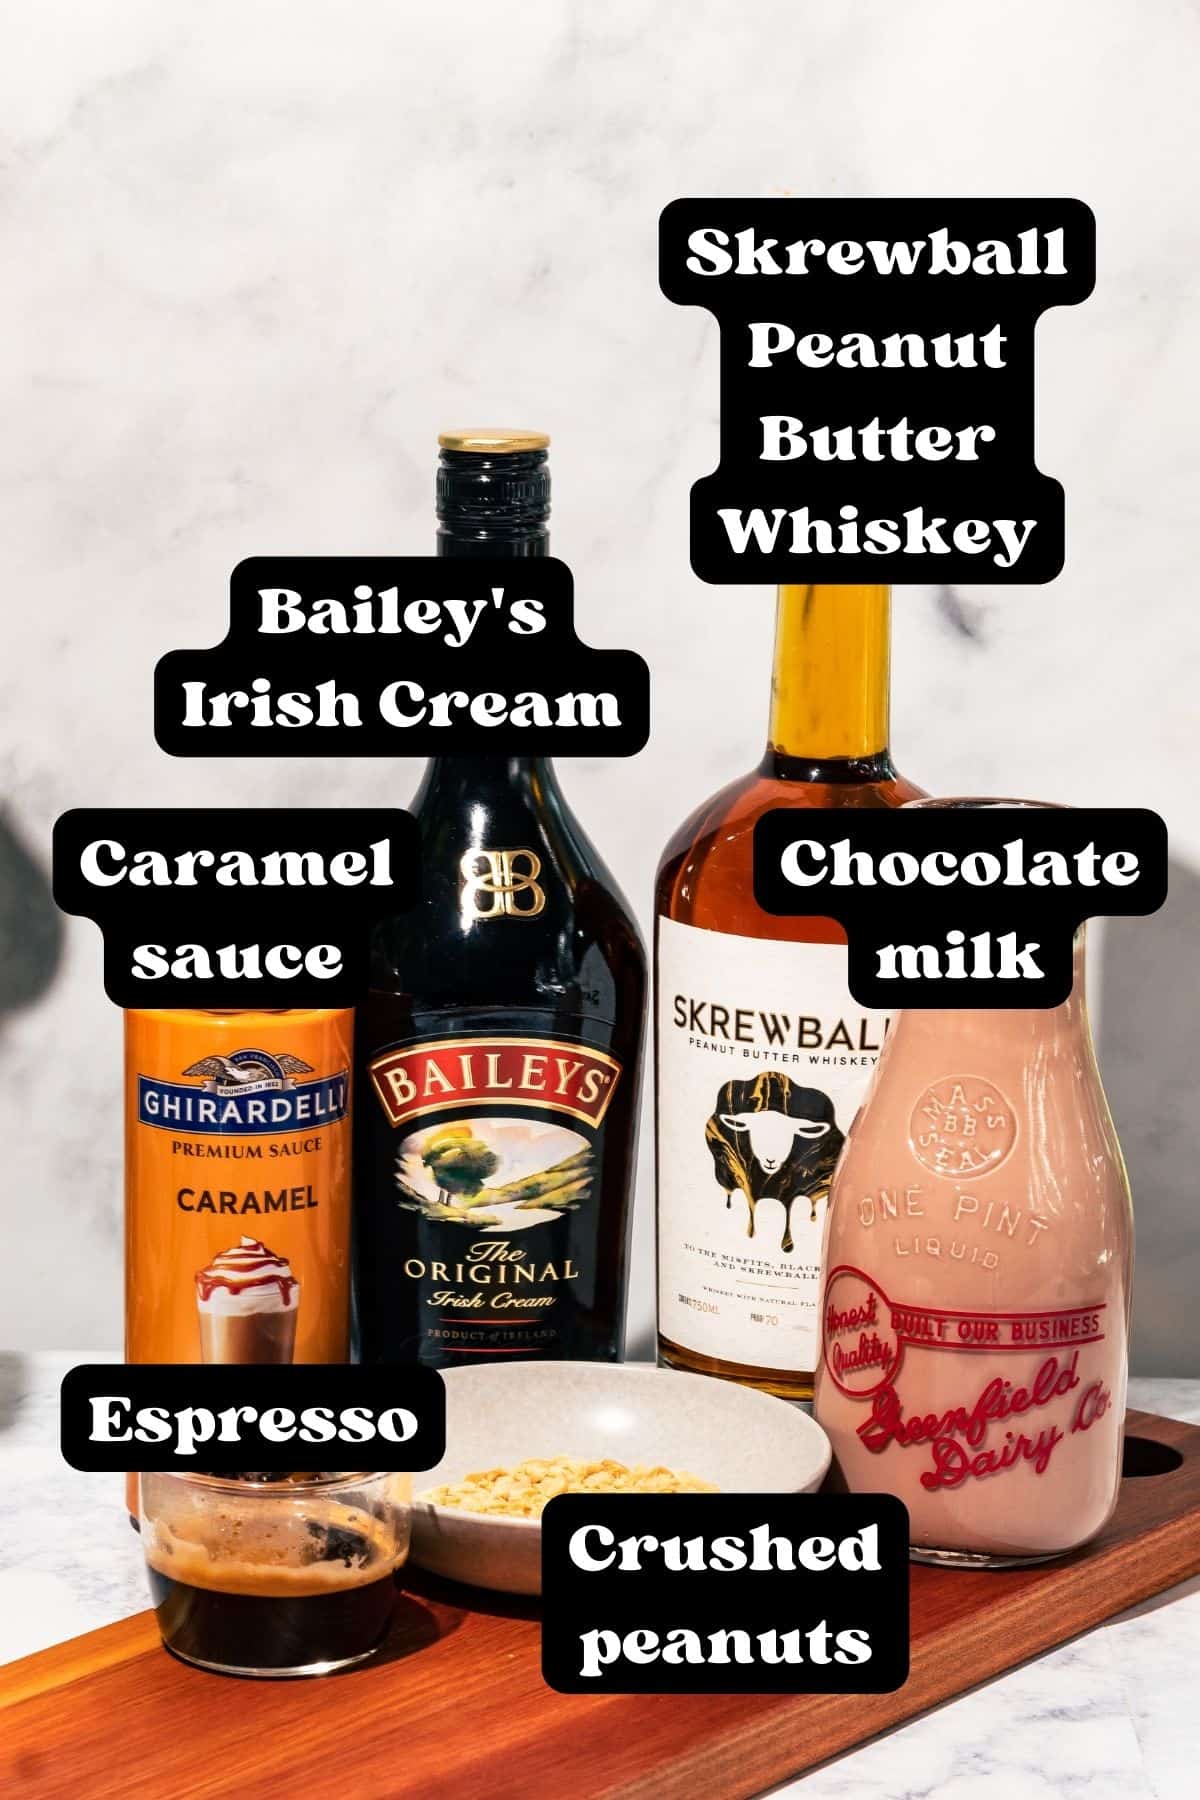 Ingredients for the Irish Latte laid out on a wood surface.